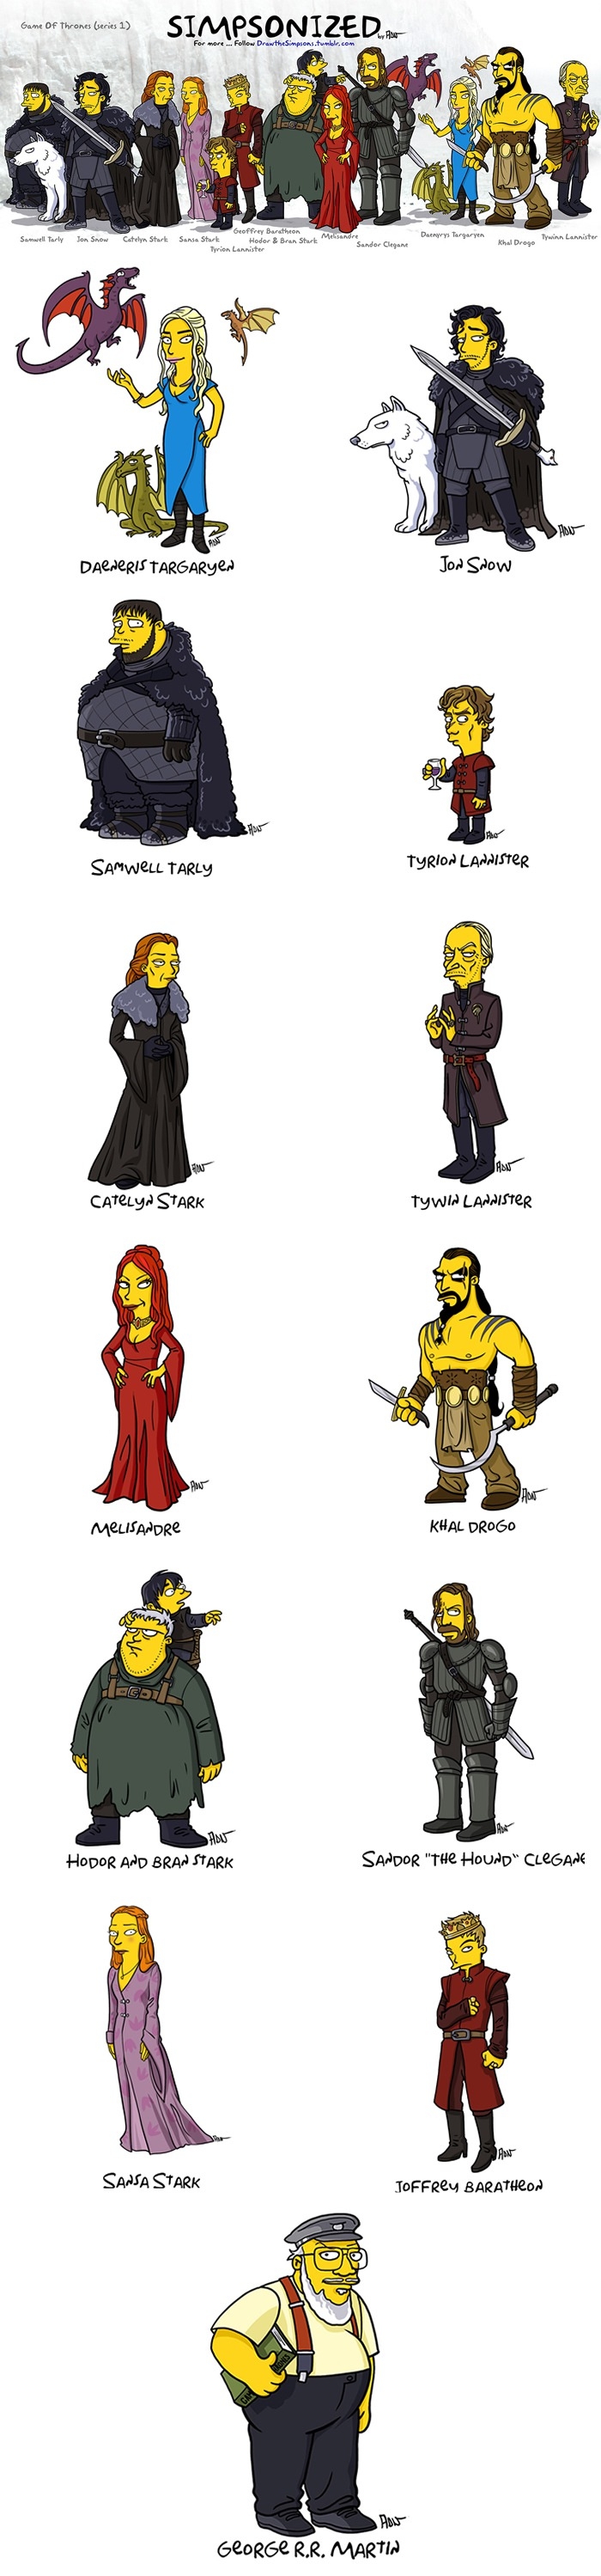 Game of Simpsons